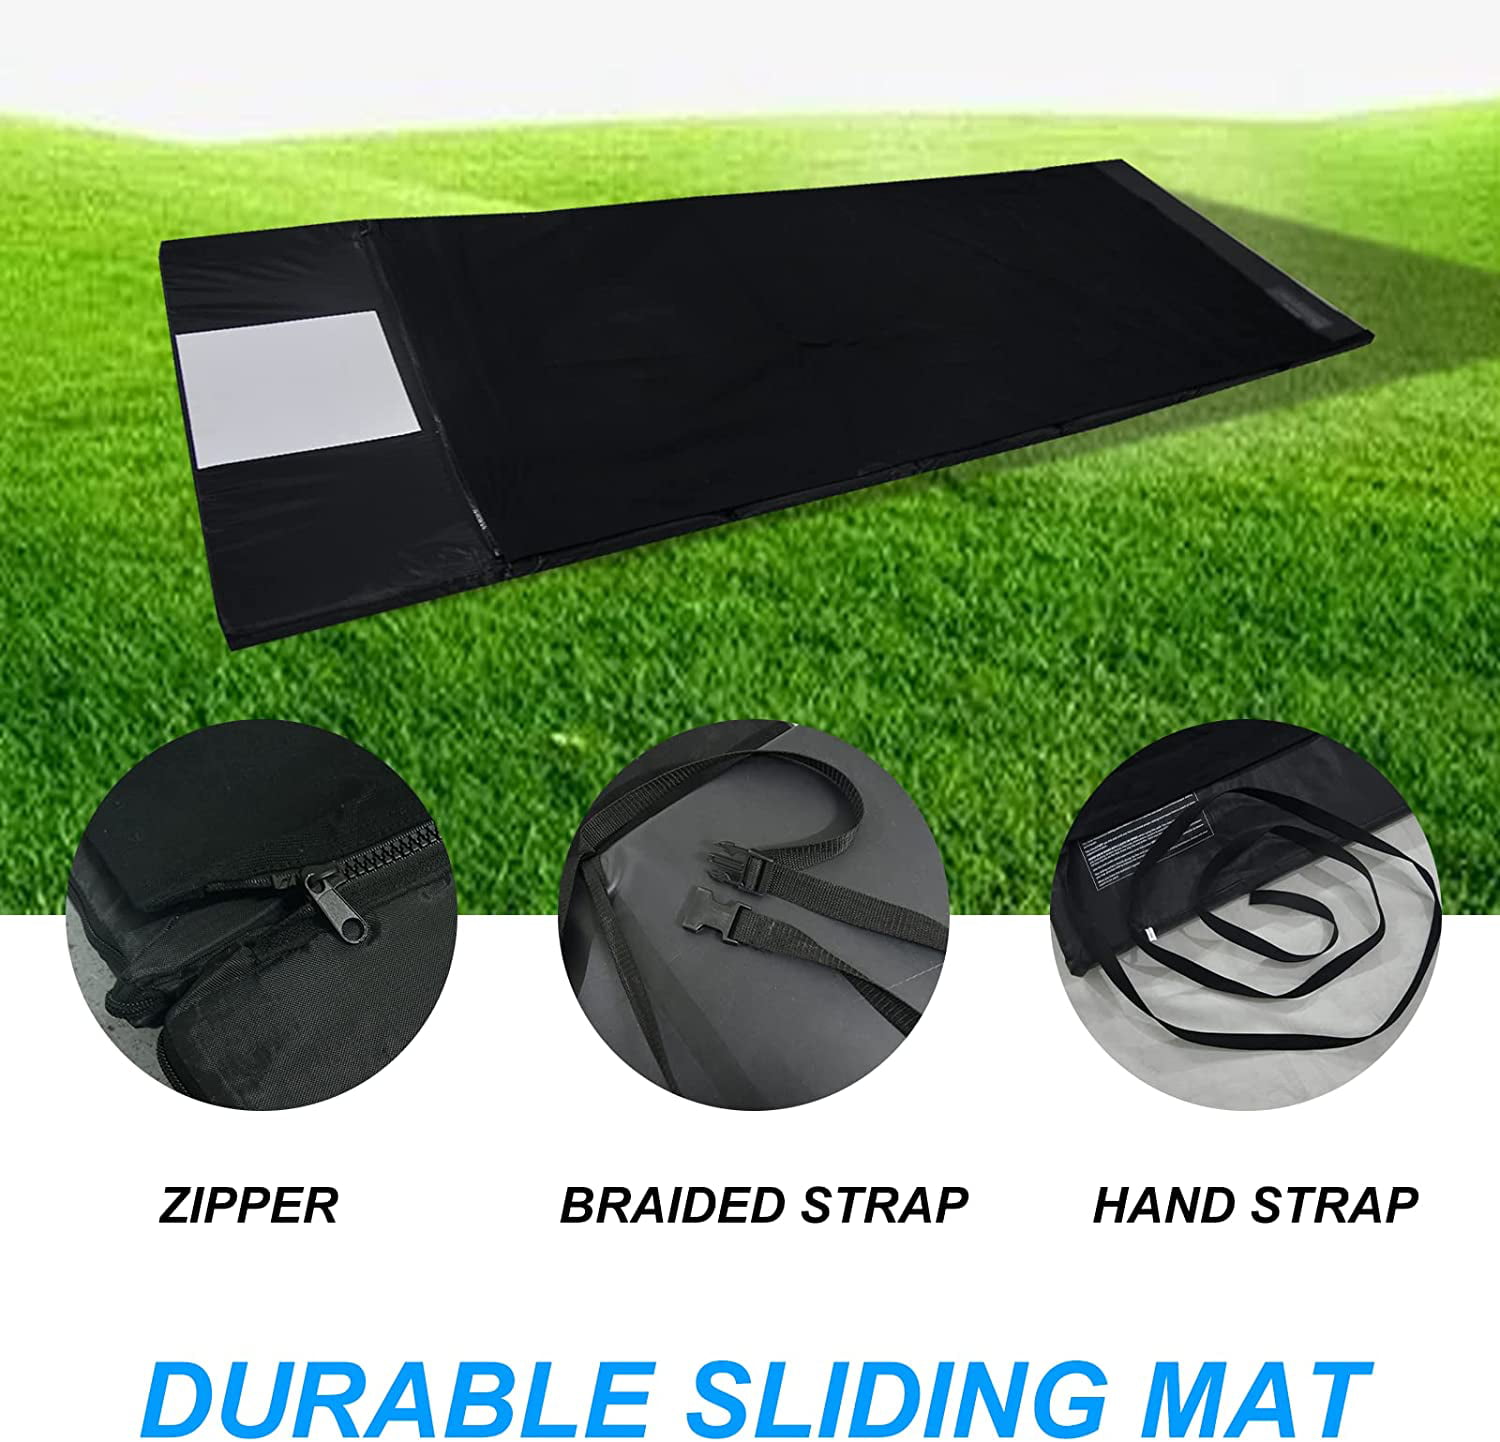 Andgoal Baseball Softball Sliding Mat - Durable Practice Mat for Indoor and Outdoor Sliding, Size: 124 x 43.3 x 1.7, Black